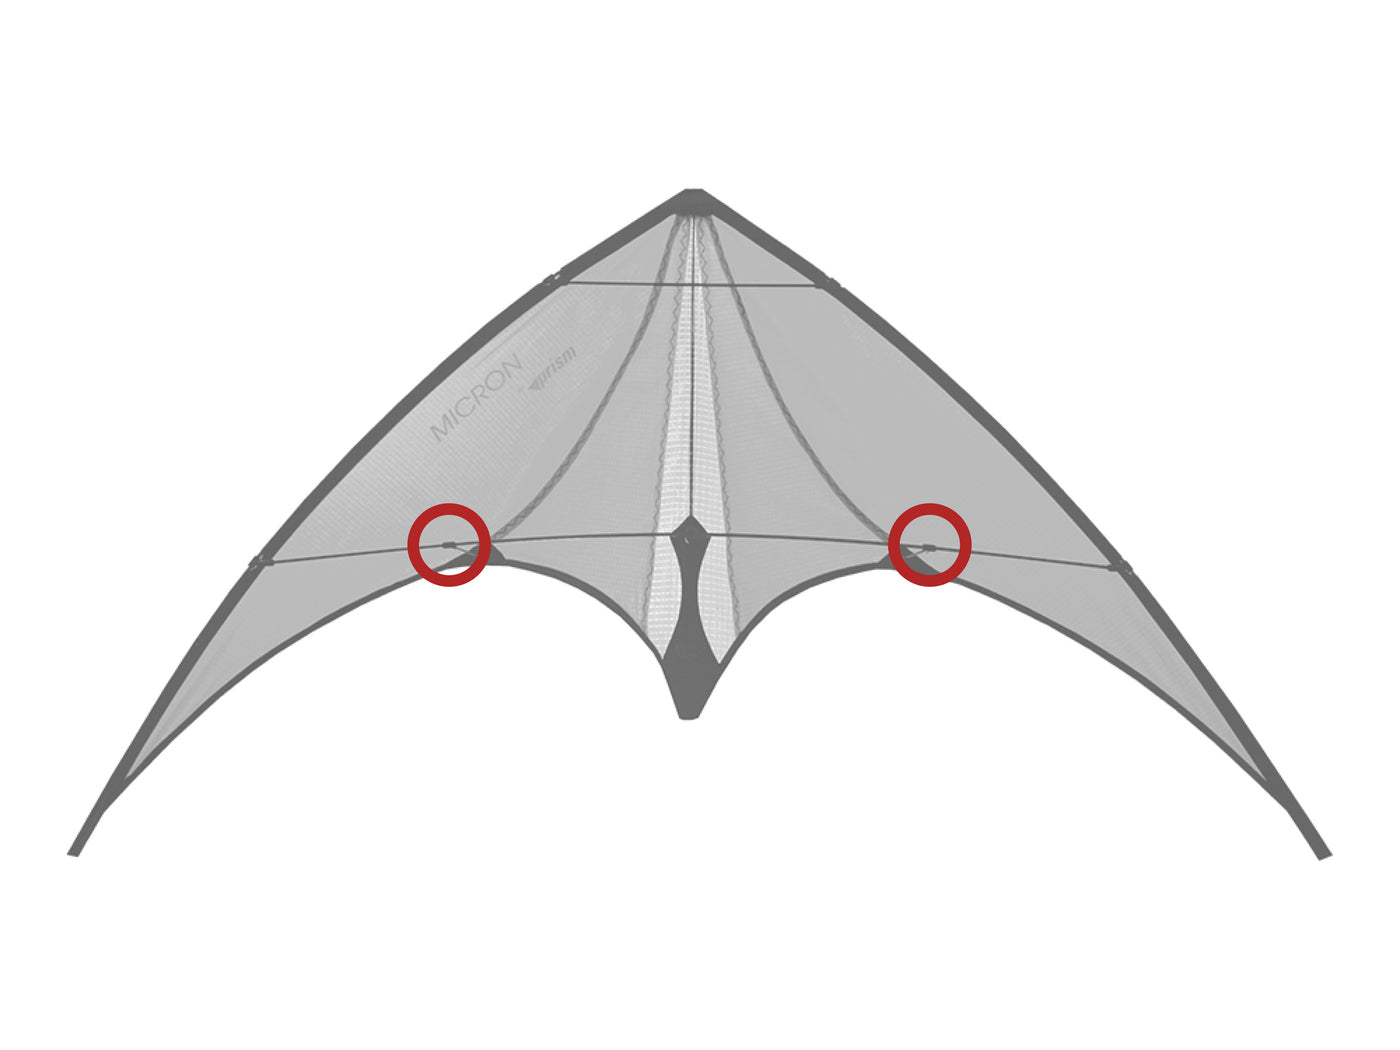 Diagram showing location of the Micron Standoff Retainer Fittings (set of 2) on the kite.